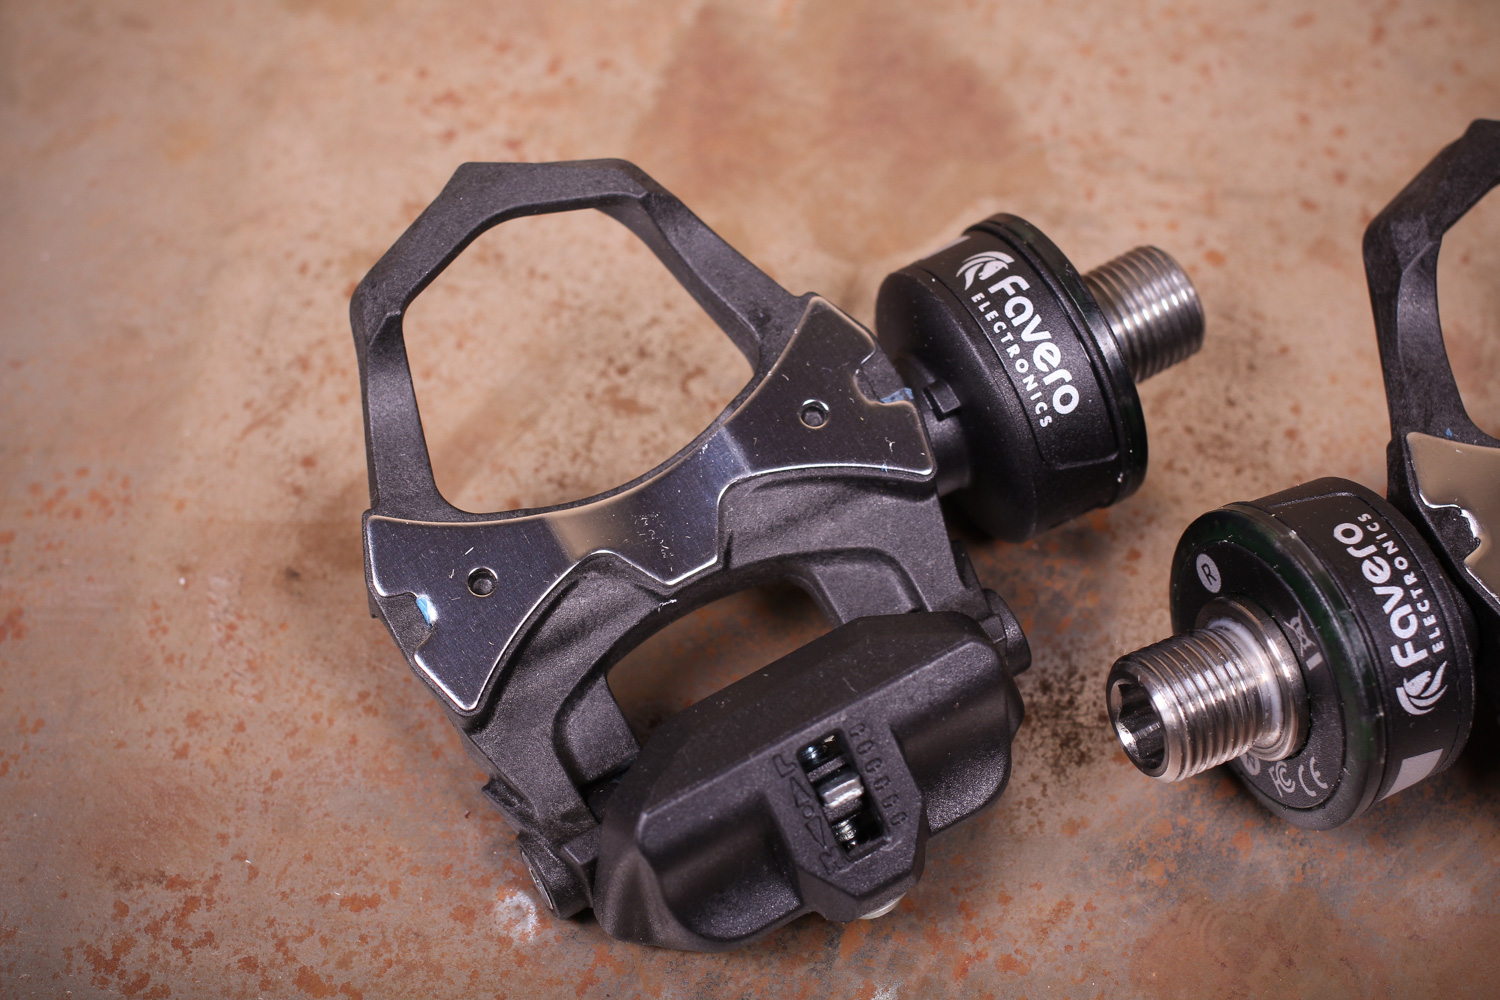 Sloppenwijk Uitleg Klooster Review: Favero Assioma Duo power meter pedals | road.cc